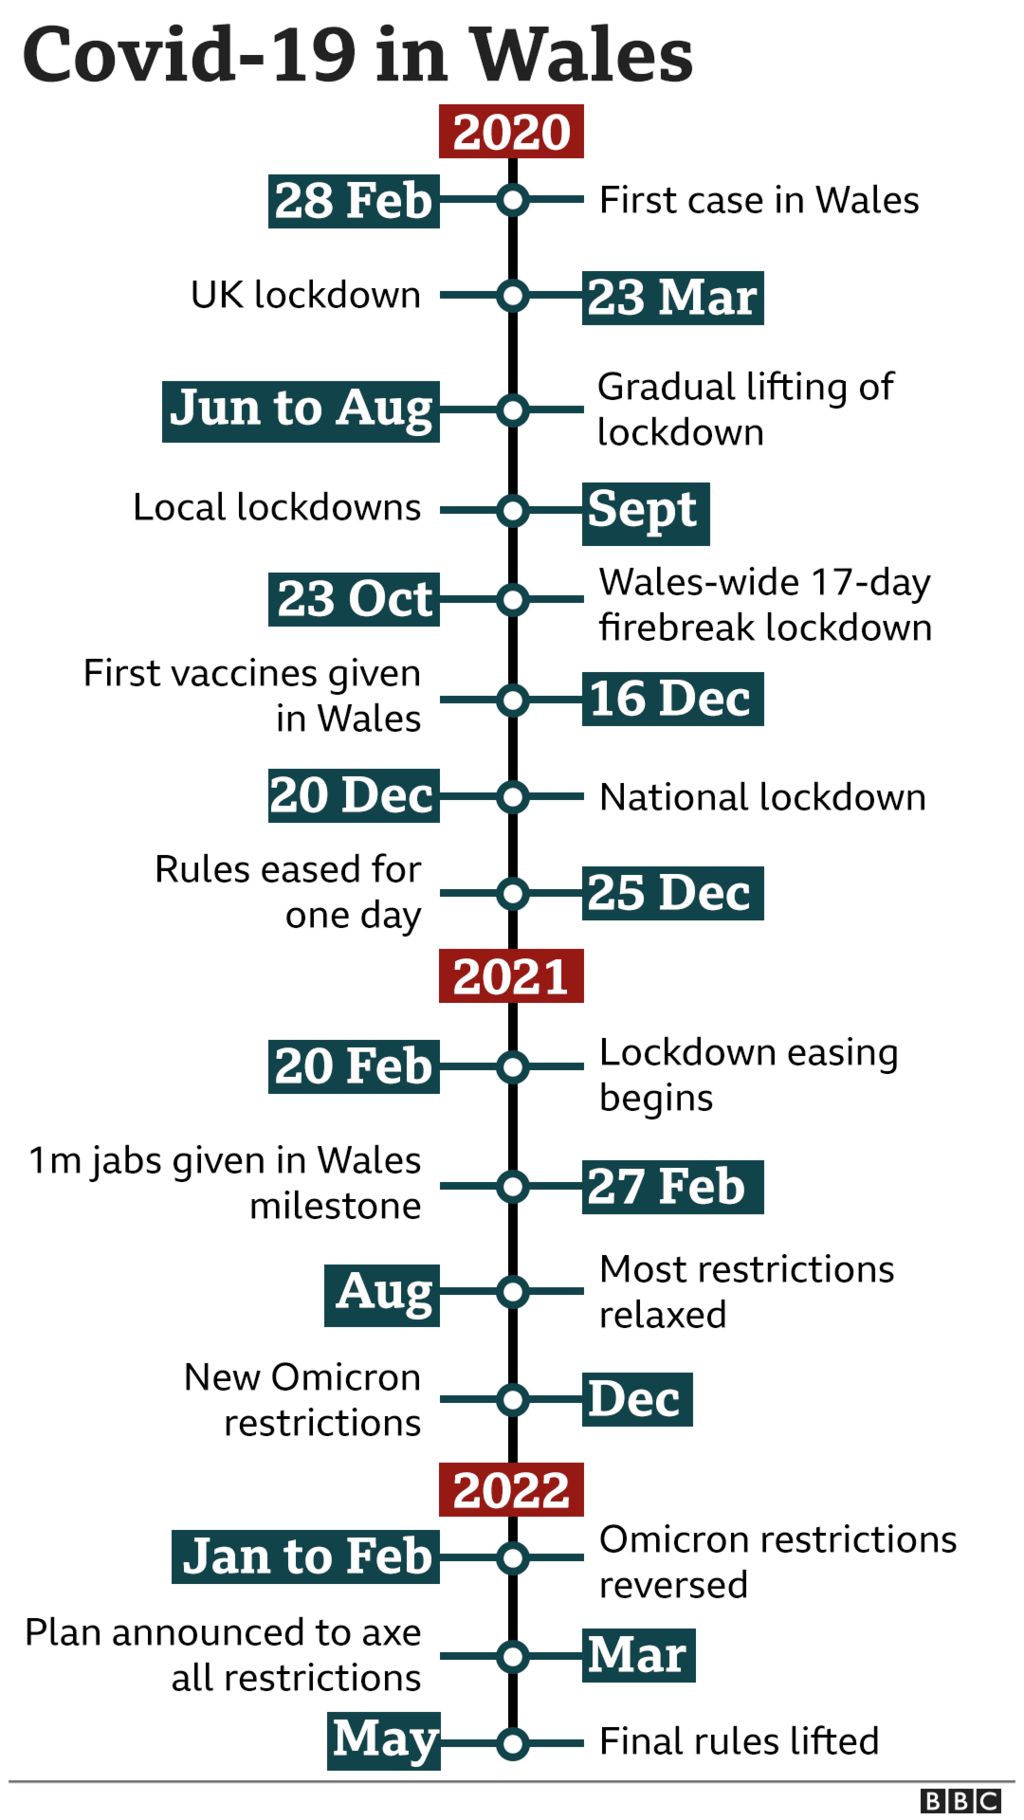 Timeline of Covid rules in Wales